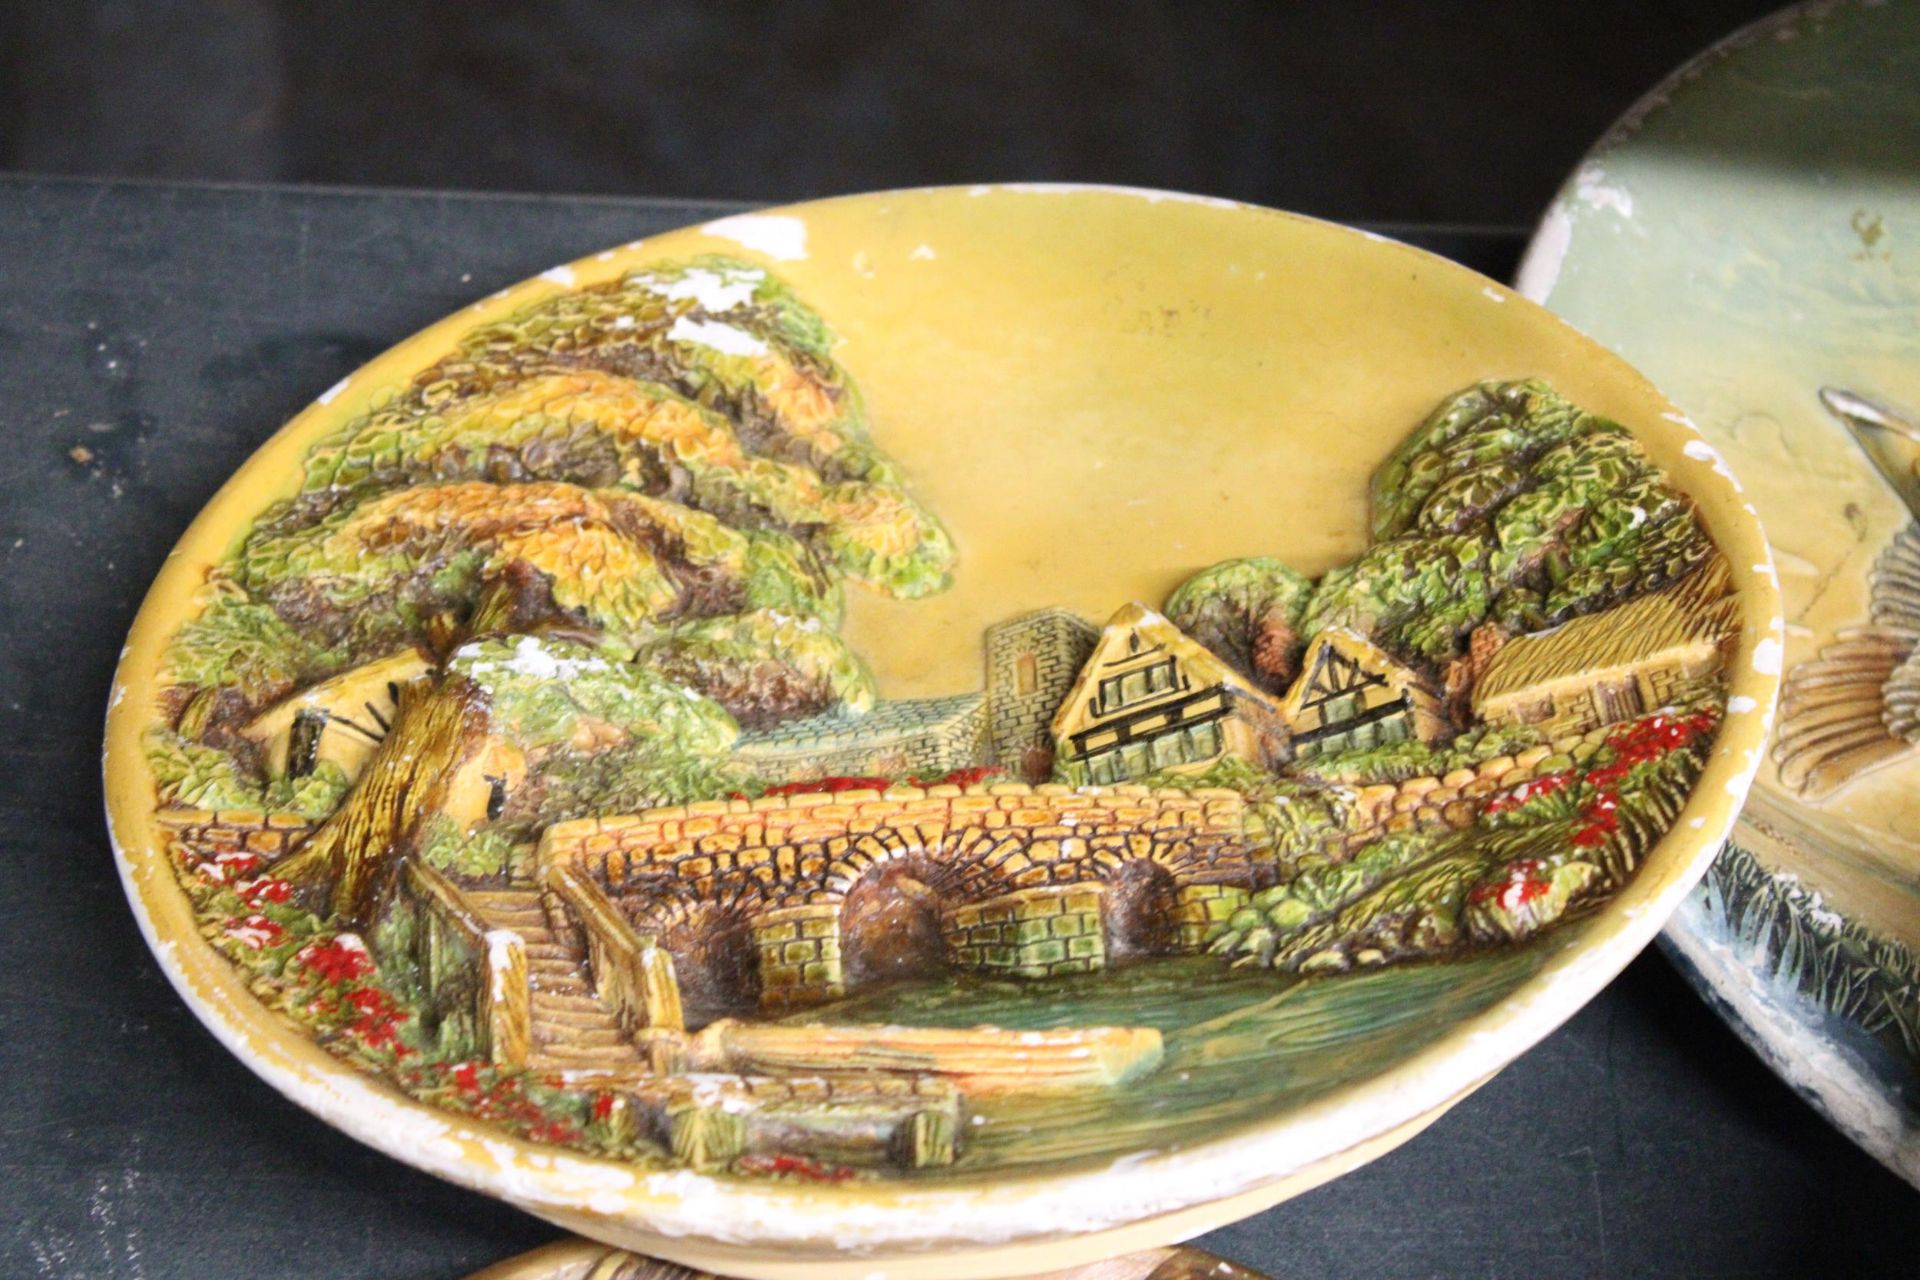 FIVE LARGE 3-D CHALKWARE VINTAGE PLATES WITH IMAGES OF HOUSES AND DUCKS - Image 5 of 6